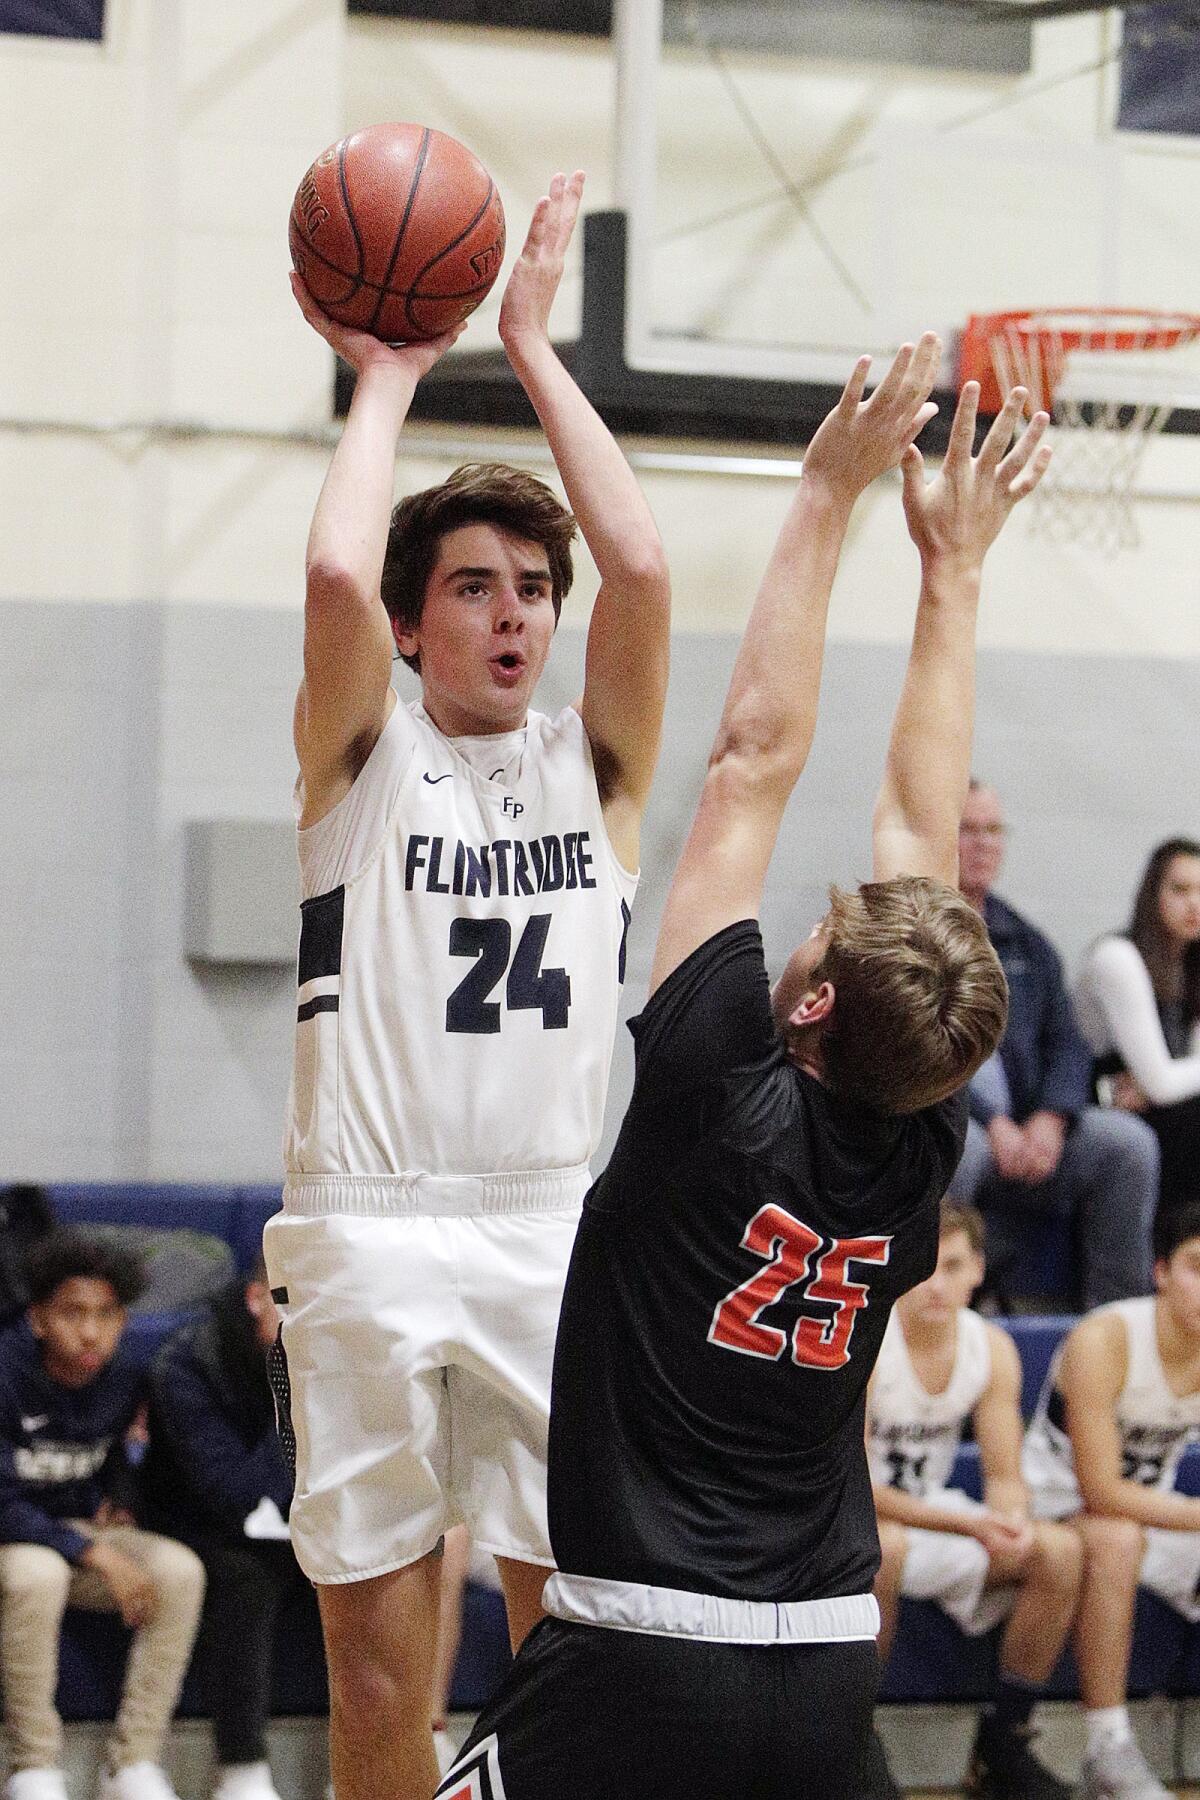 Flintridge Prep's Dylan Mealey pulls up for a jump shot against South Pasadena's Mickey Ebner in a non-league boys' basketball game at Flintridge Preparatory School on Monday, January 6, 2020.